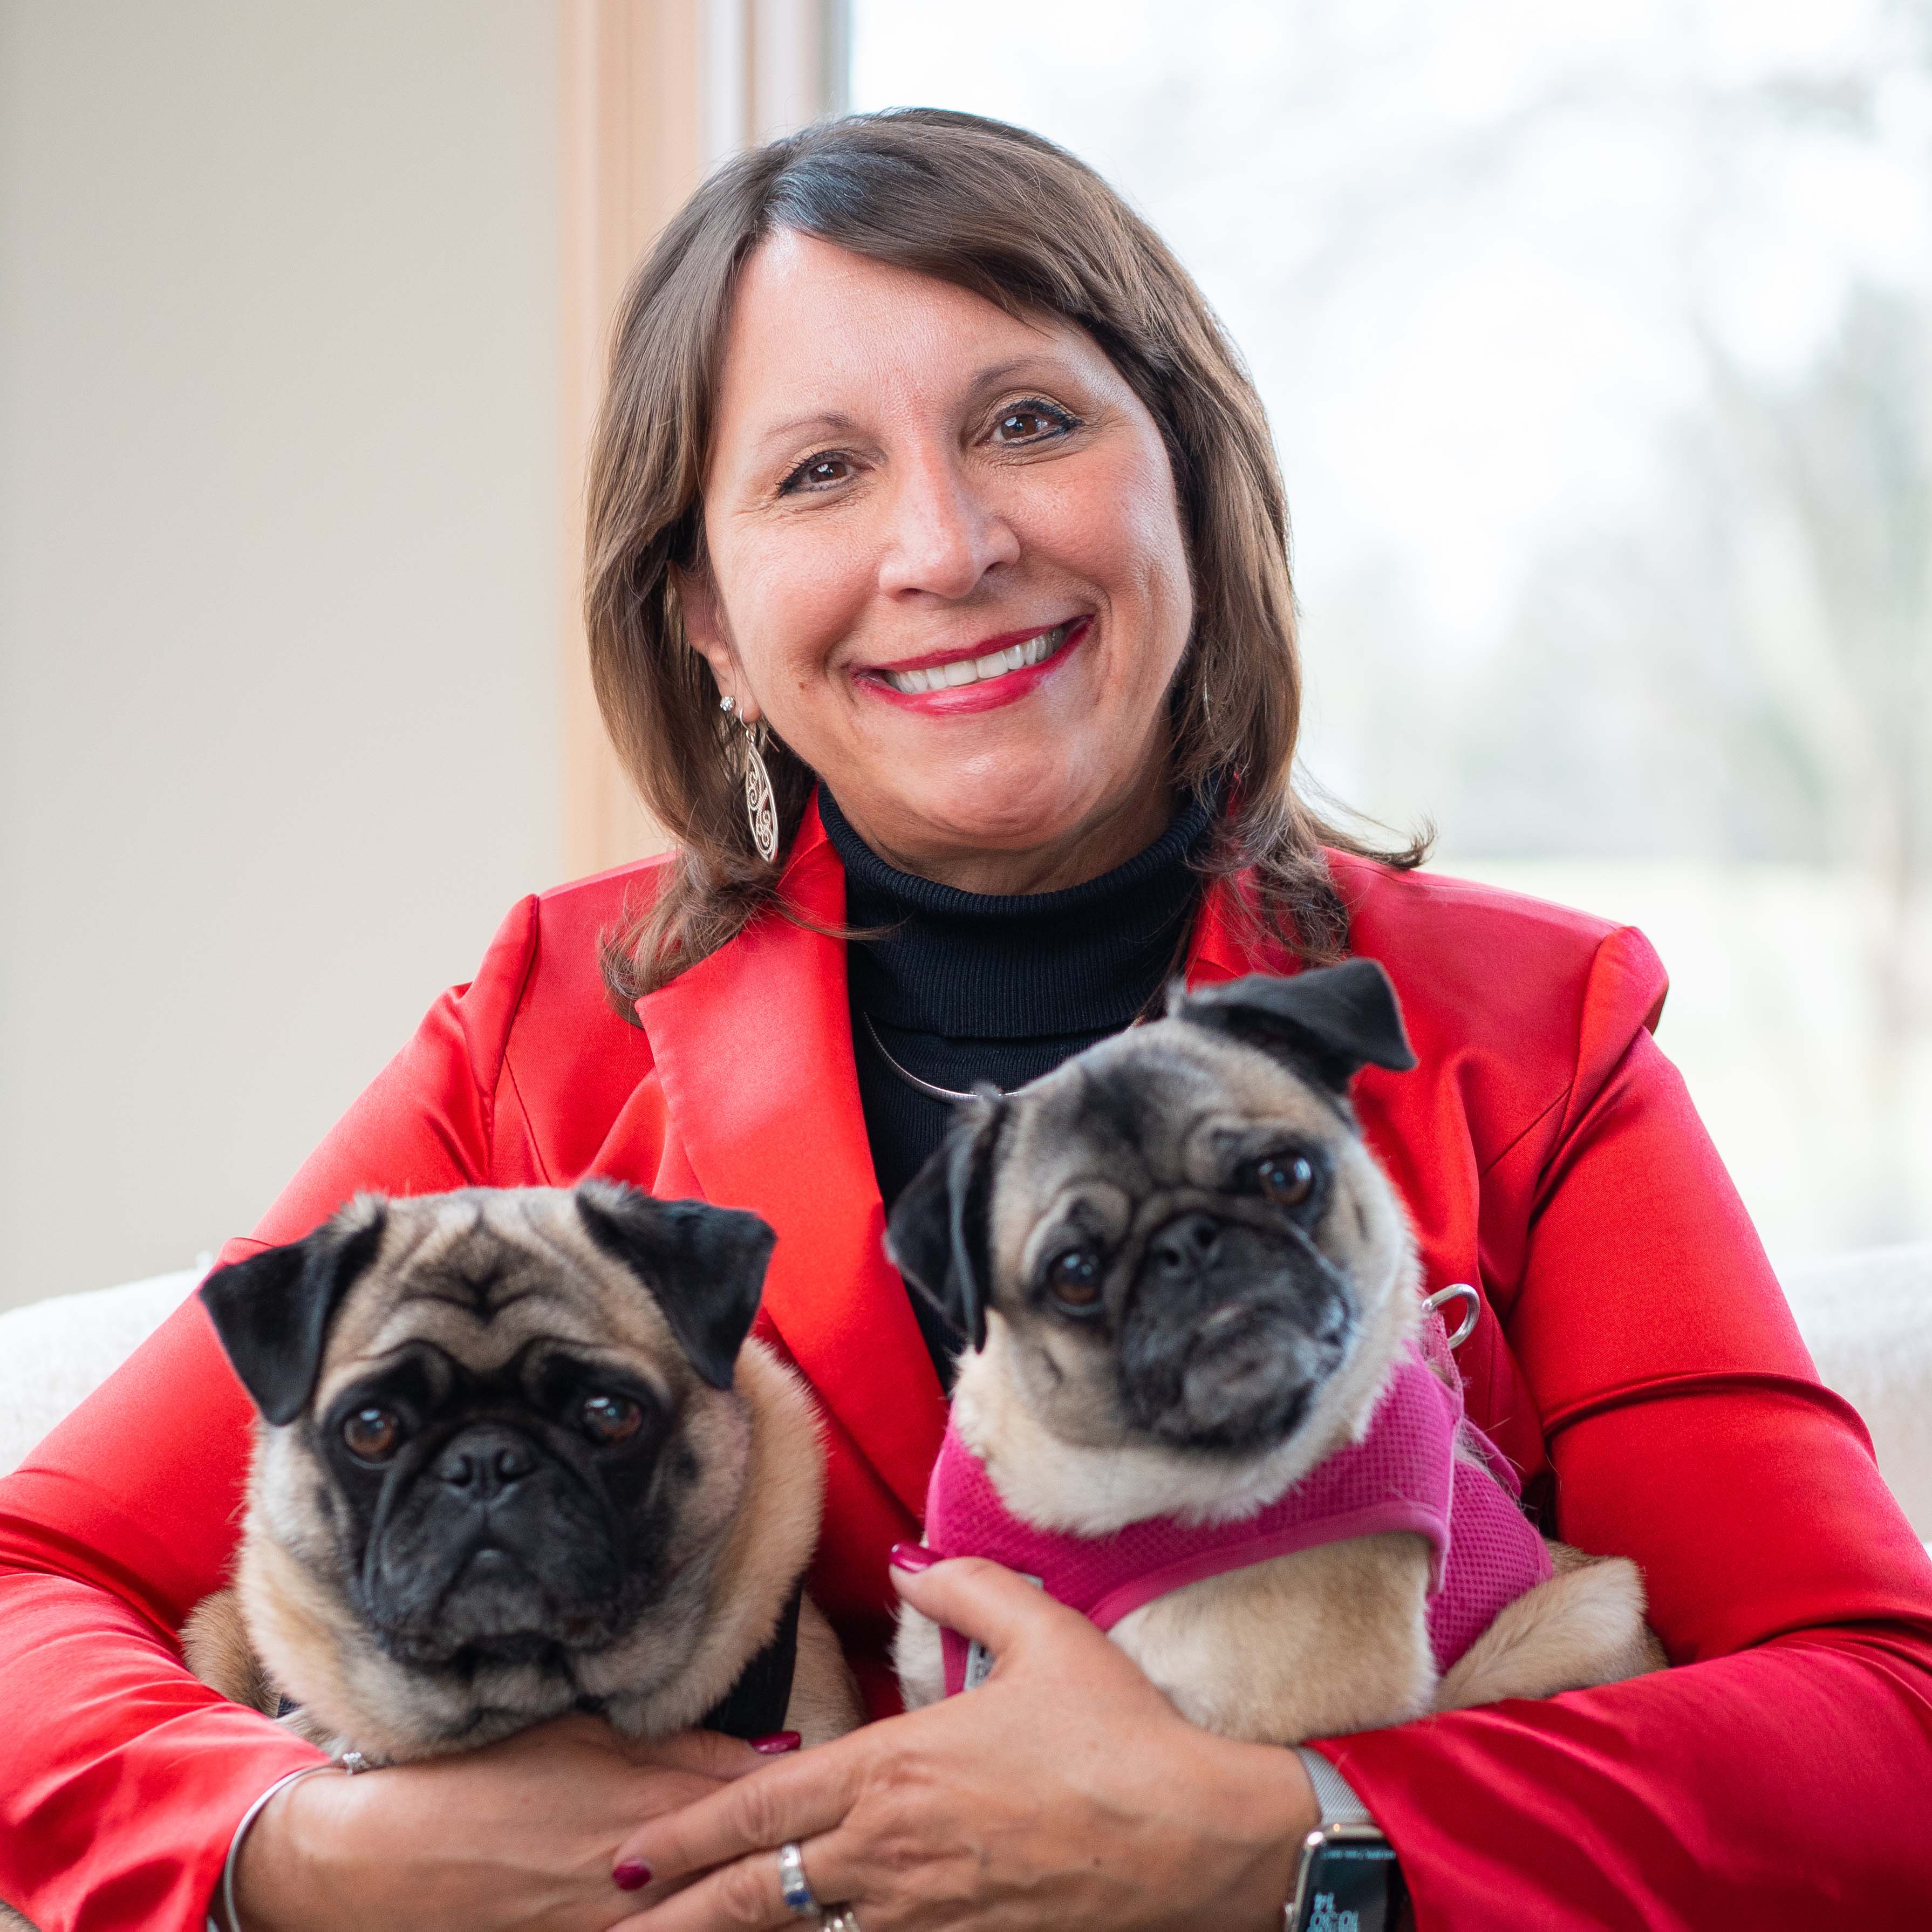 Bern Melnyk holding her two dogs